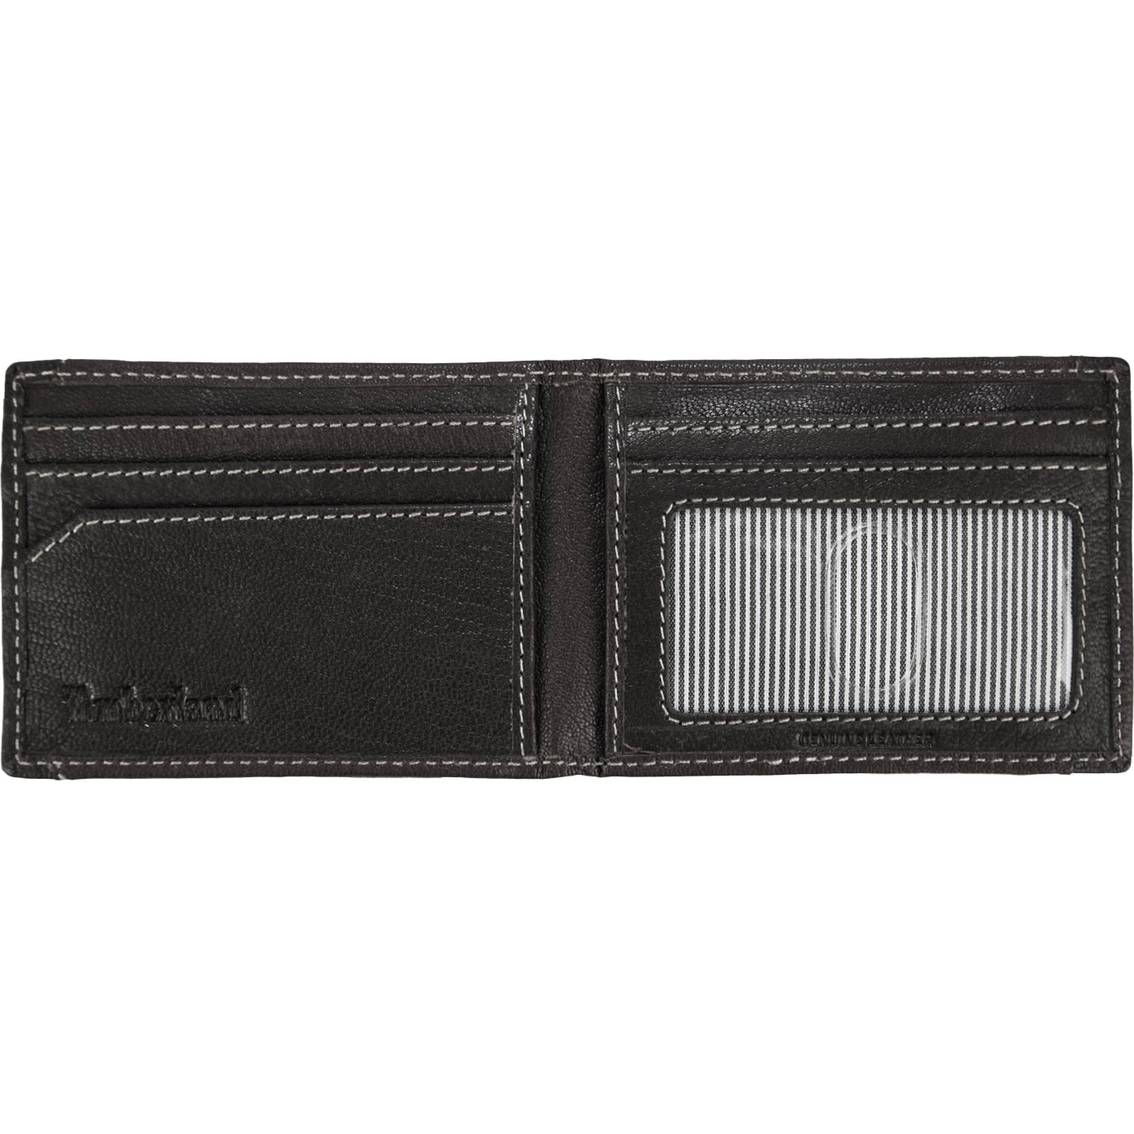 Timberland Blix Flip Money Clip | Wallets | Clothing & Accessories ...